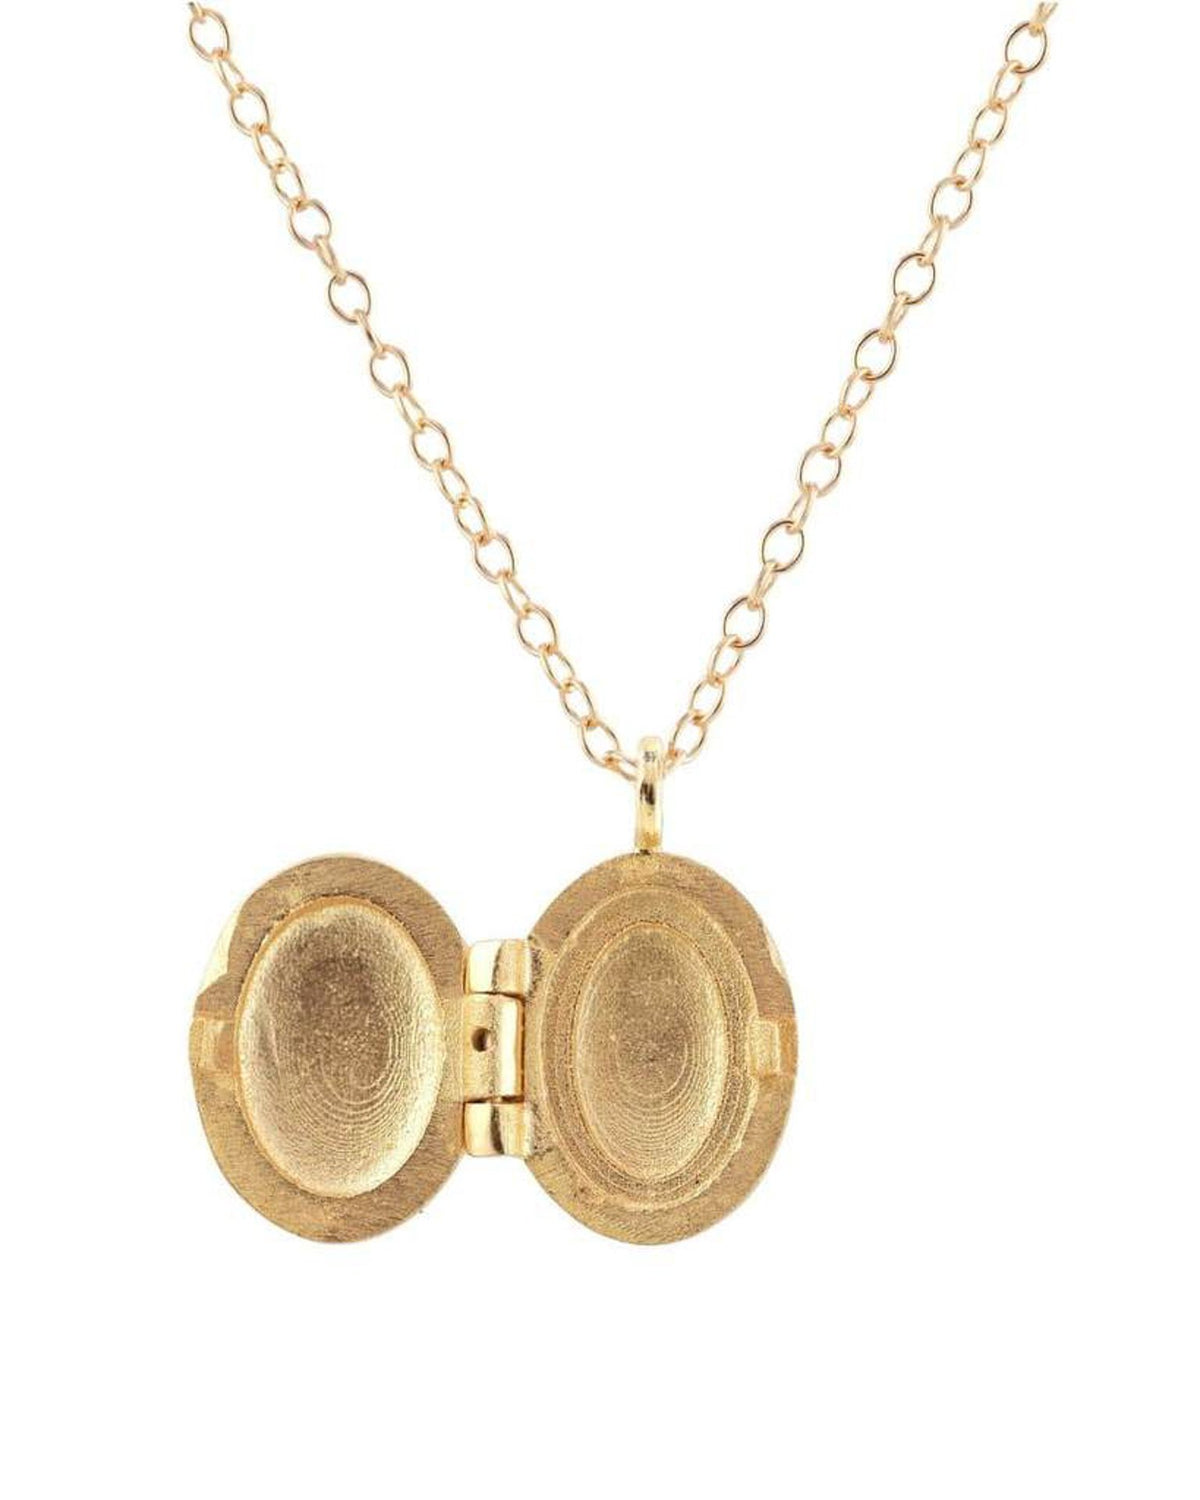 Kris Nations Small Oval Locket in Gold